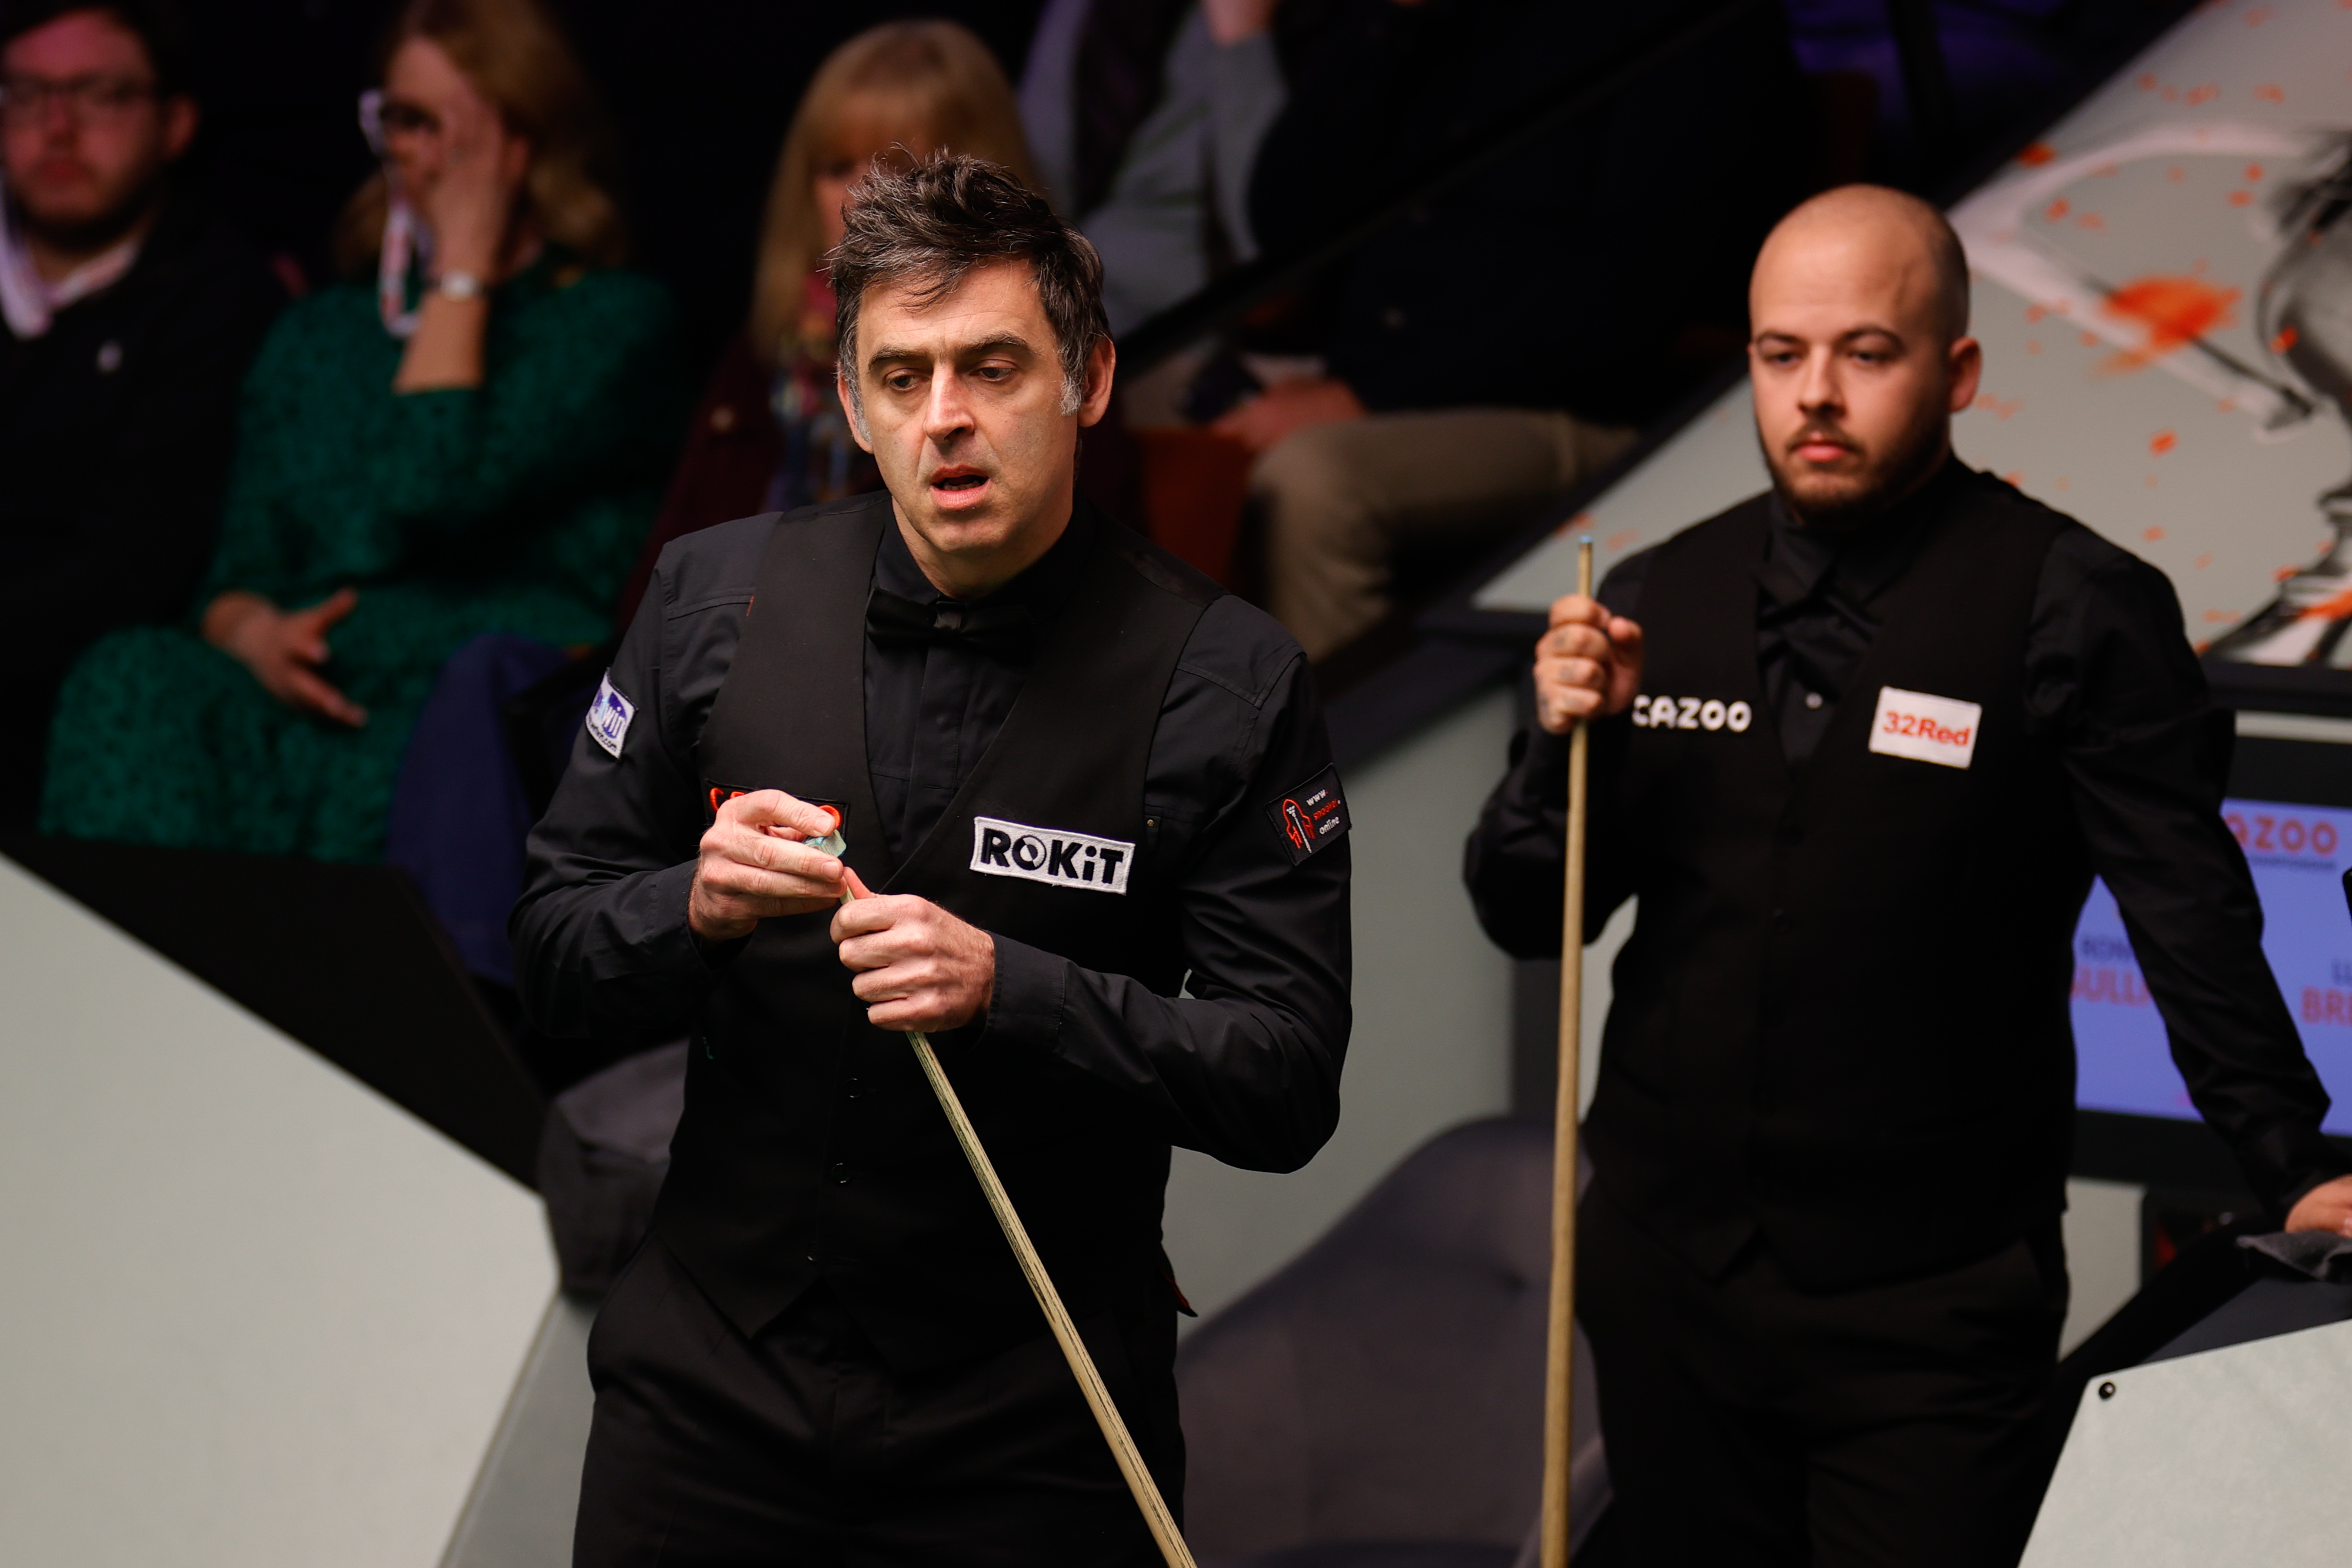 World Snooker Championship 2023 LIVE Ronnie OSullivan, John Higgins and Mark Selby in quarter-final action plus scores and results - Live